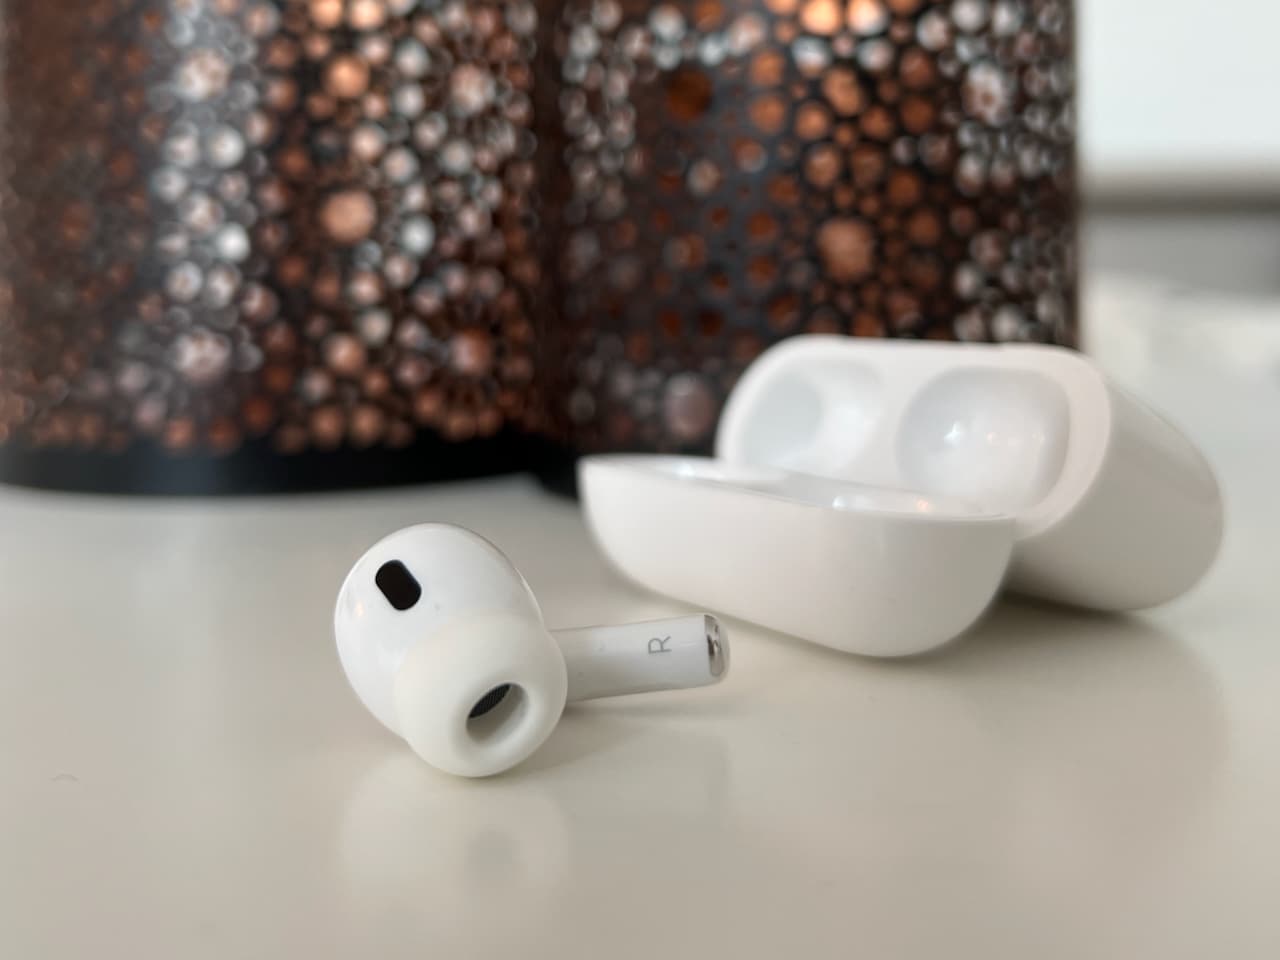 It goes so fast: I don't care, the left AirPod has disappeared again. With the where is? App you can find him again in seconds.